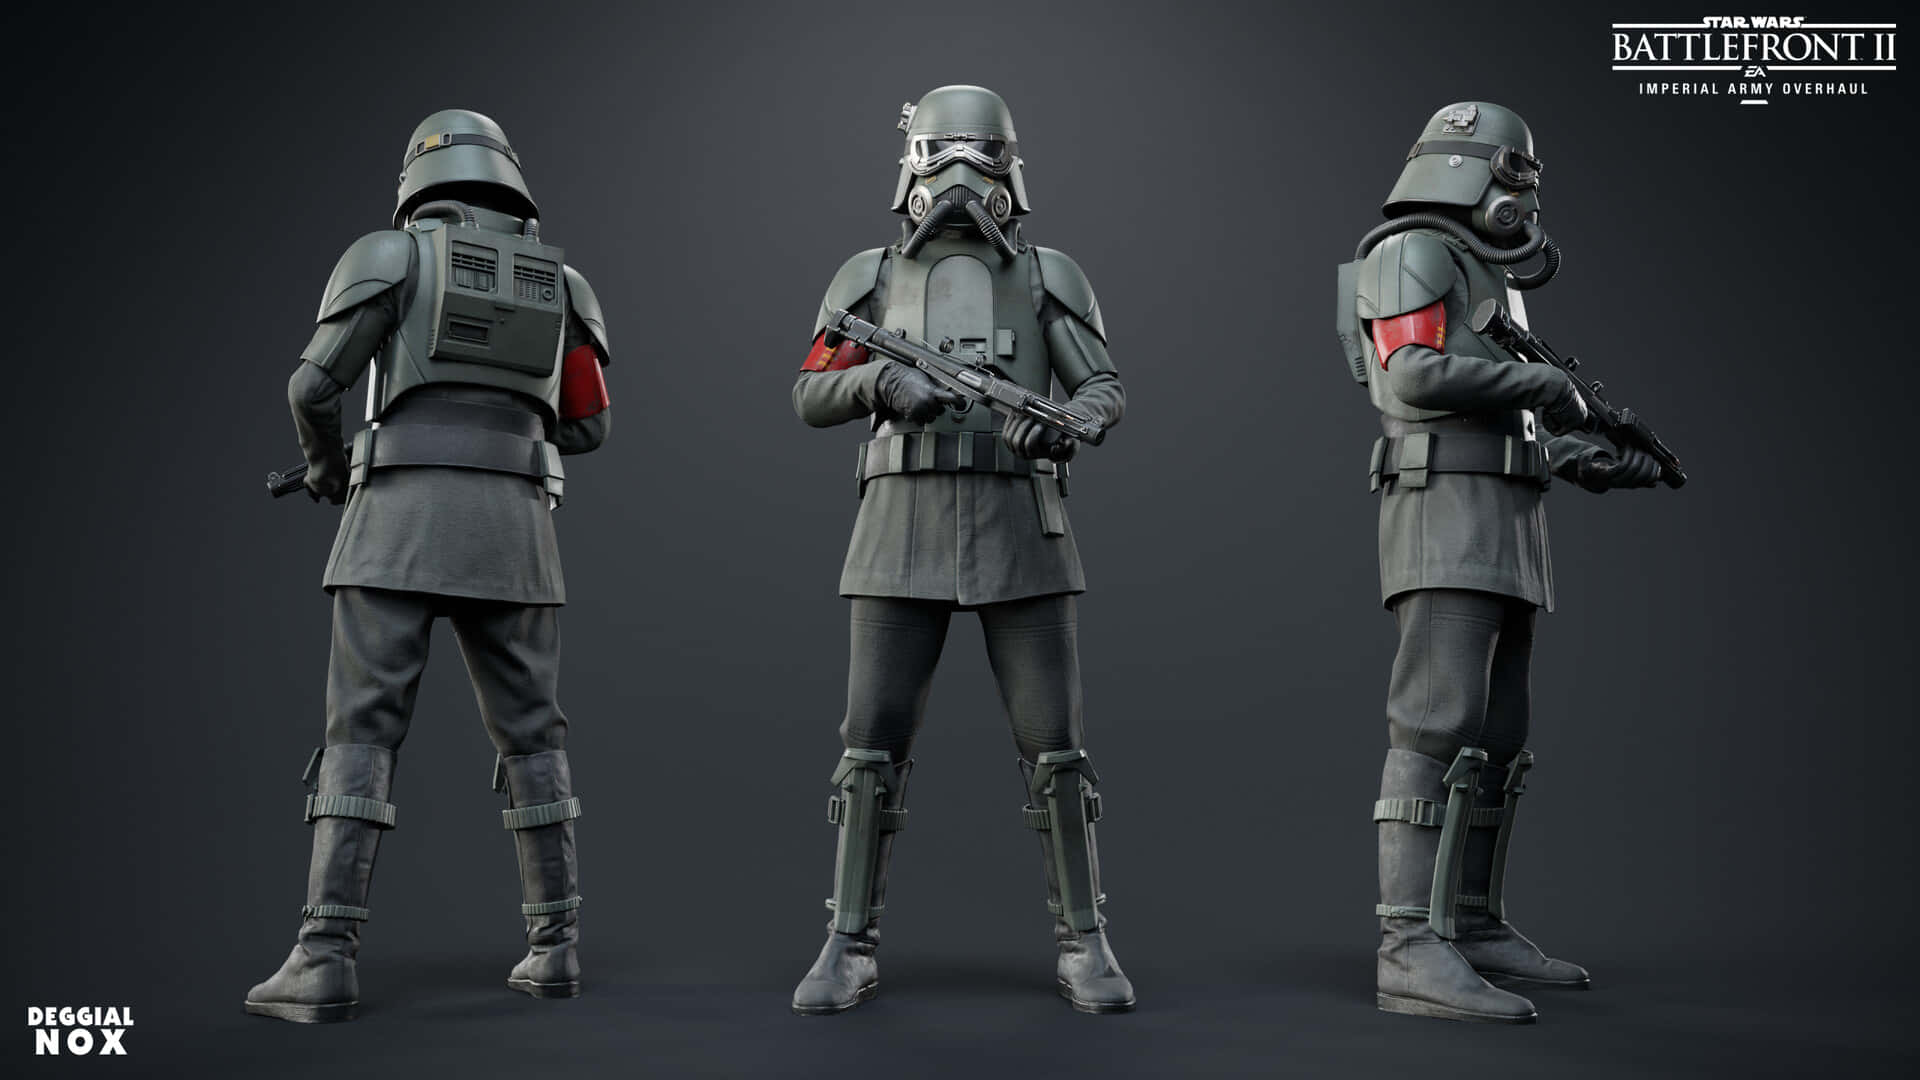 Imperial Army 1920 x 1080 wallpaper Wallpaper